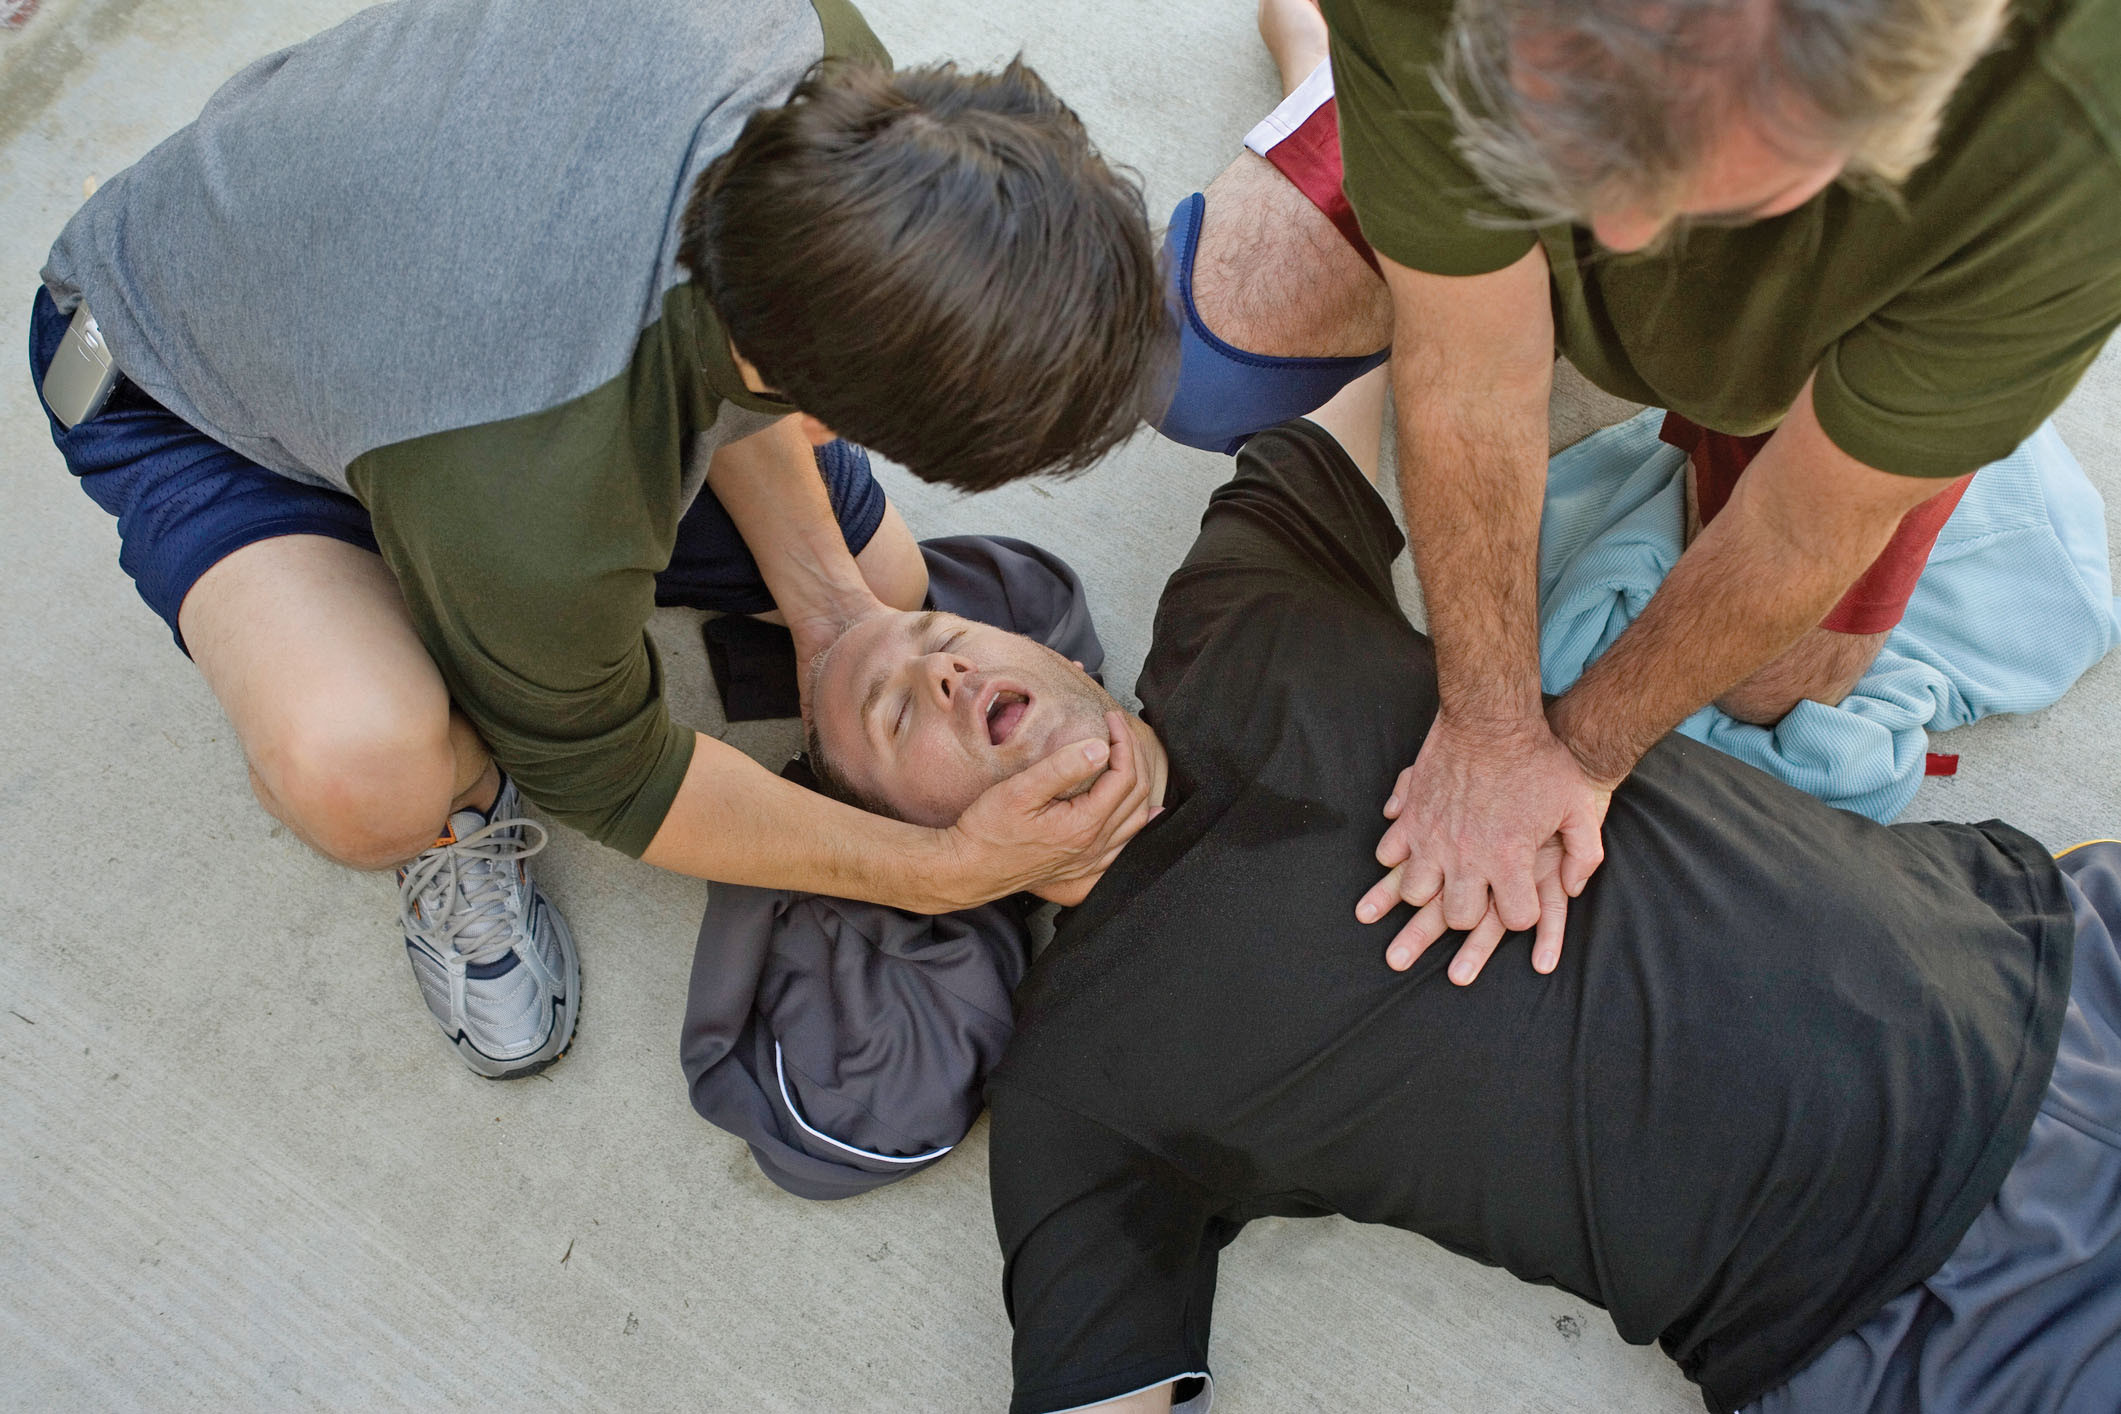 photo of a man in distress on the ground with two people performing CPR on him